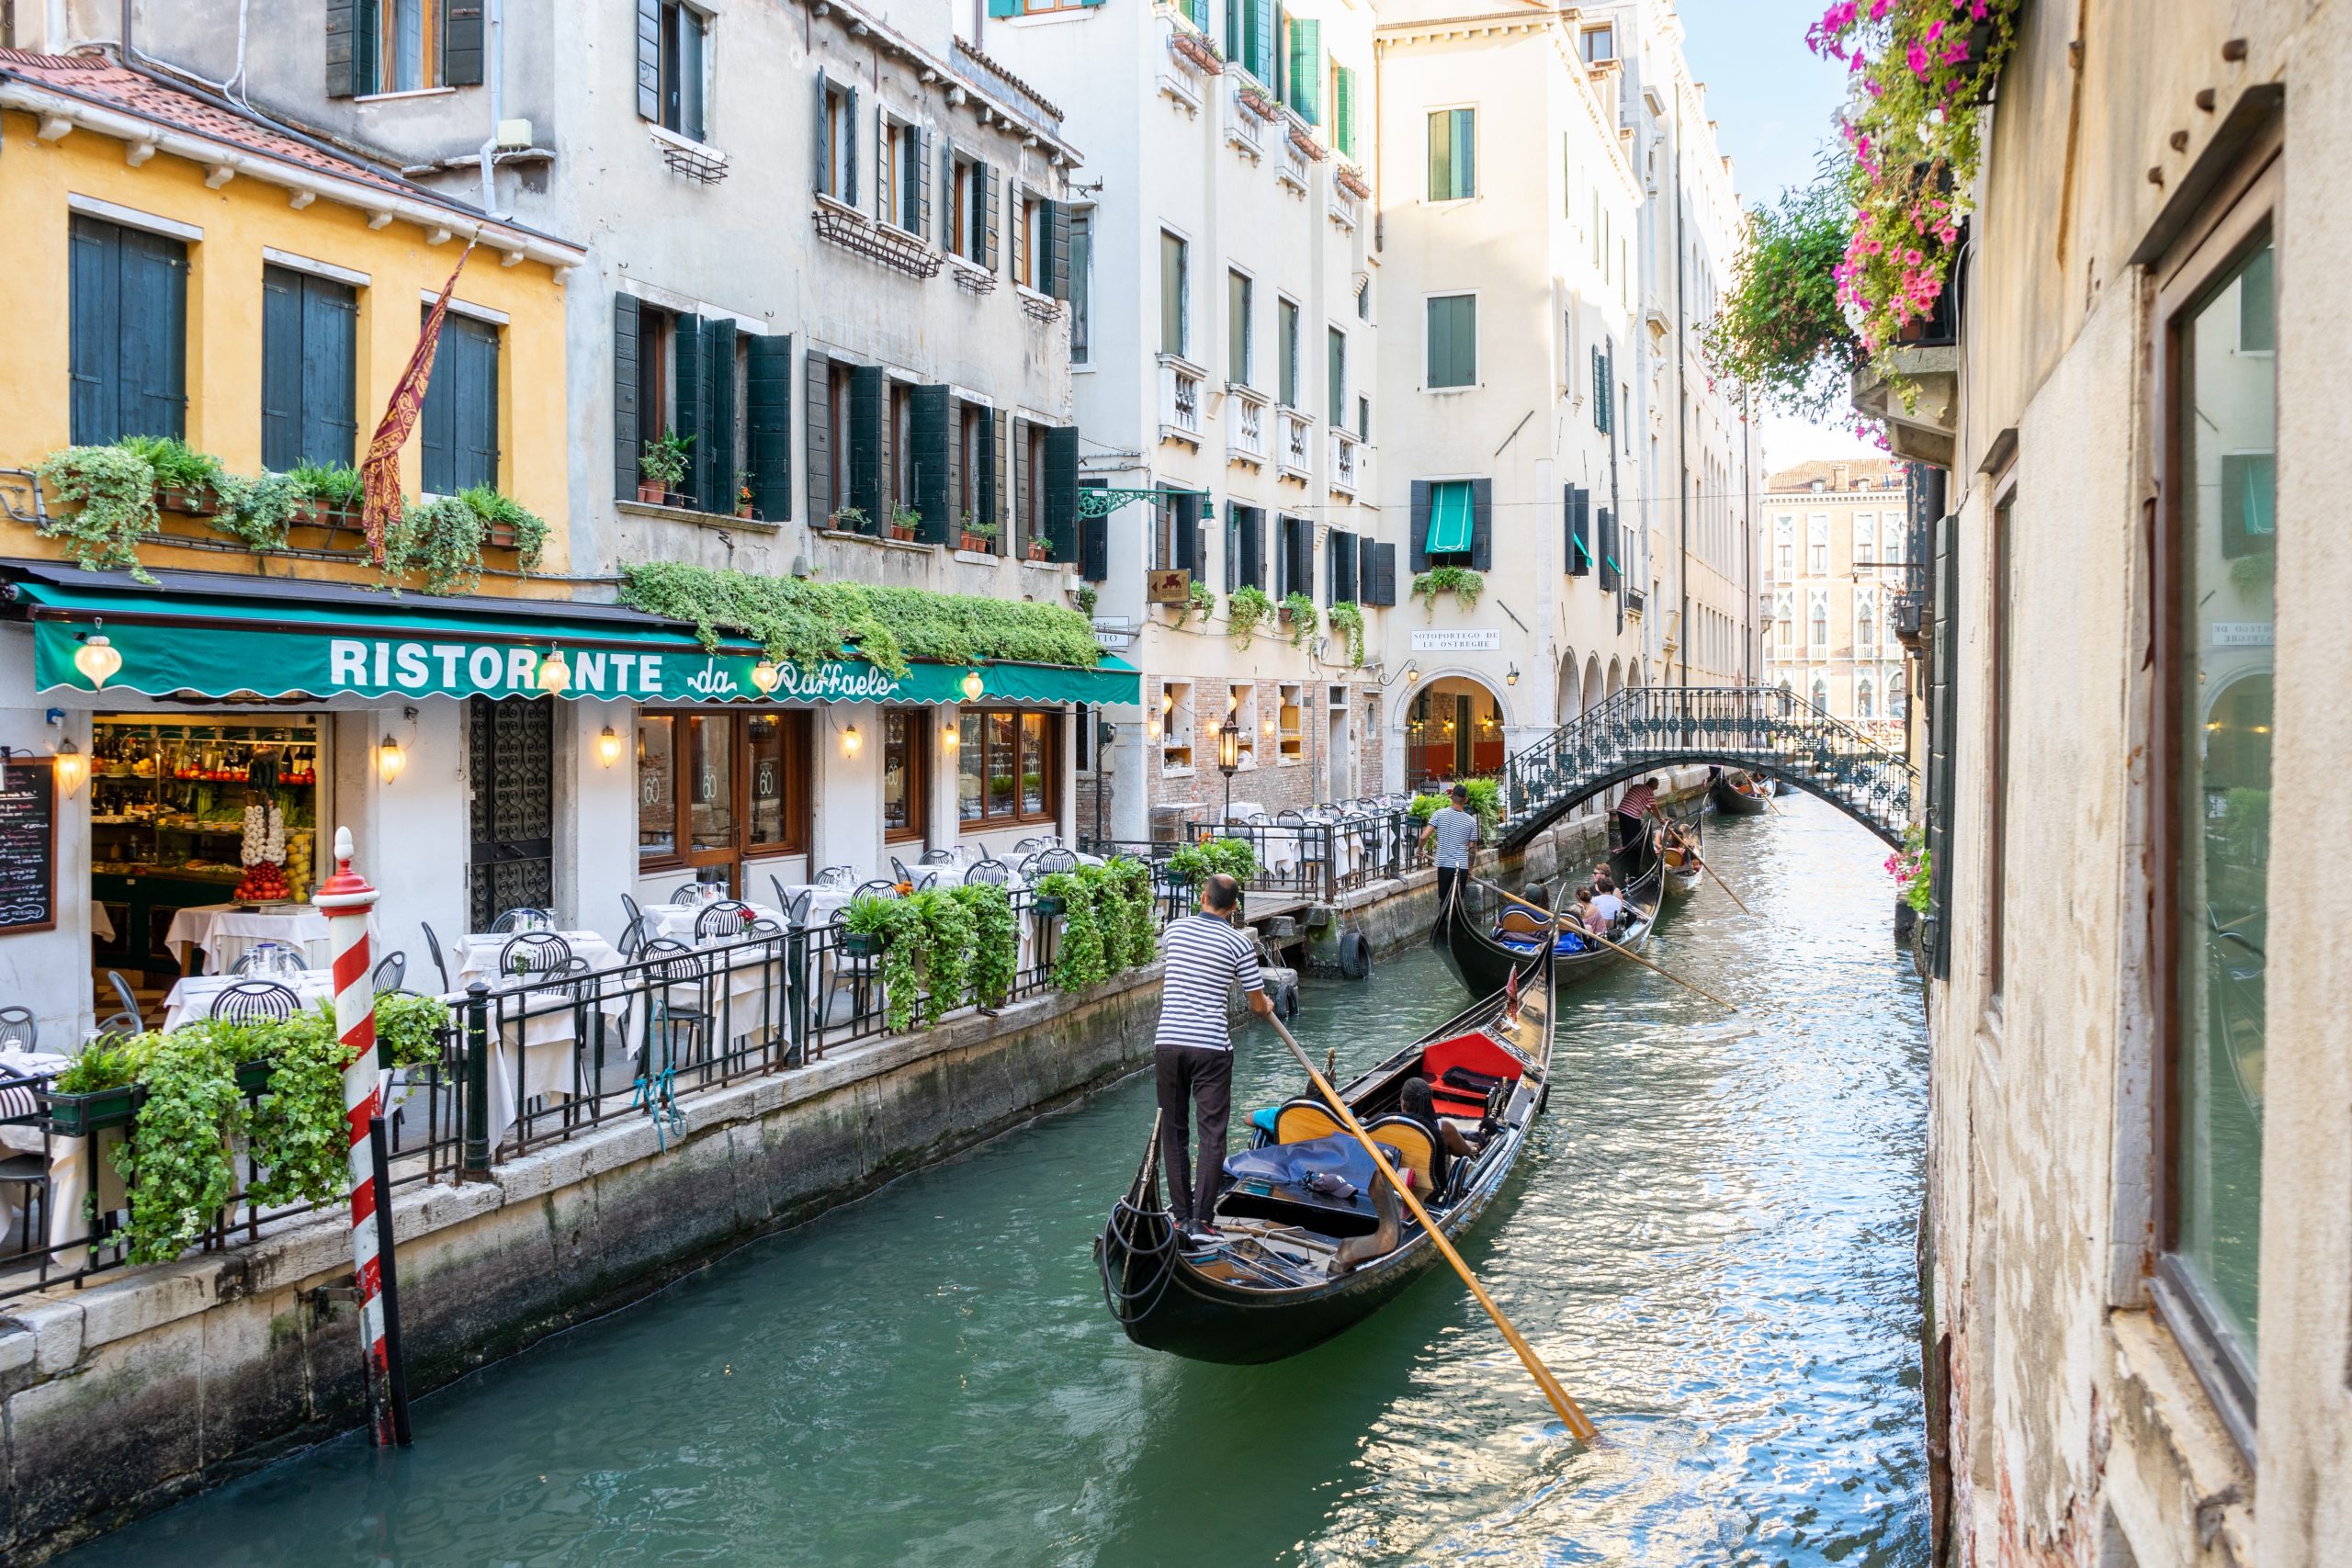 Two gondolas sail down a Venice canal, passing homes and restaurants on the bank